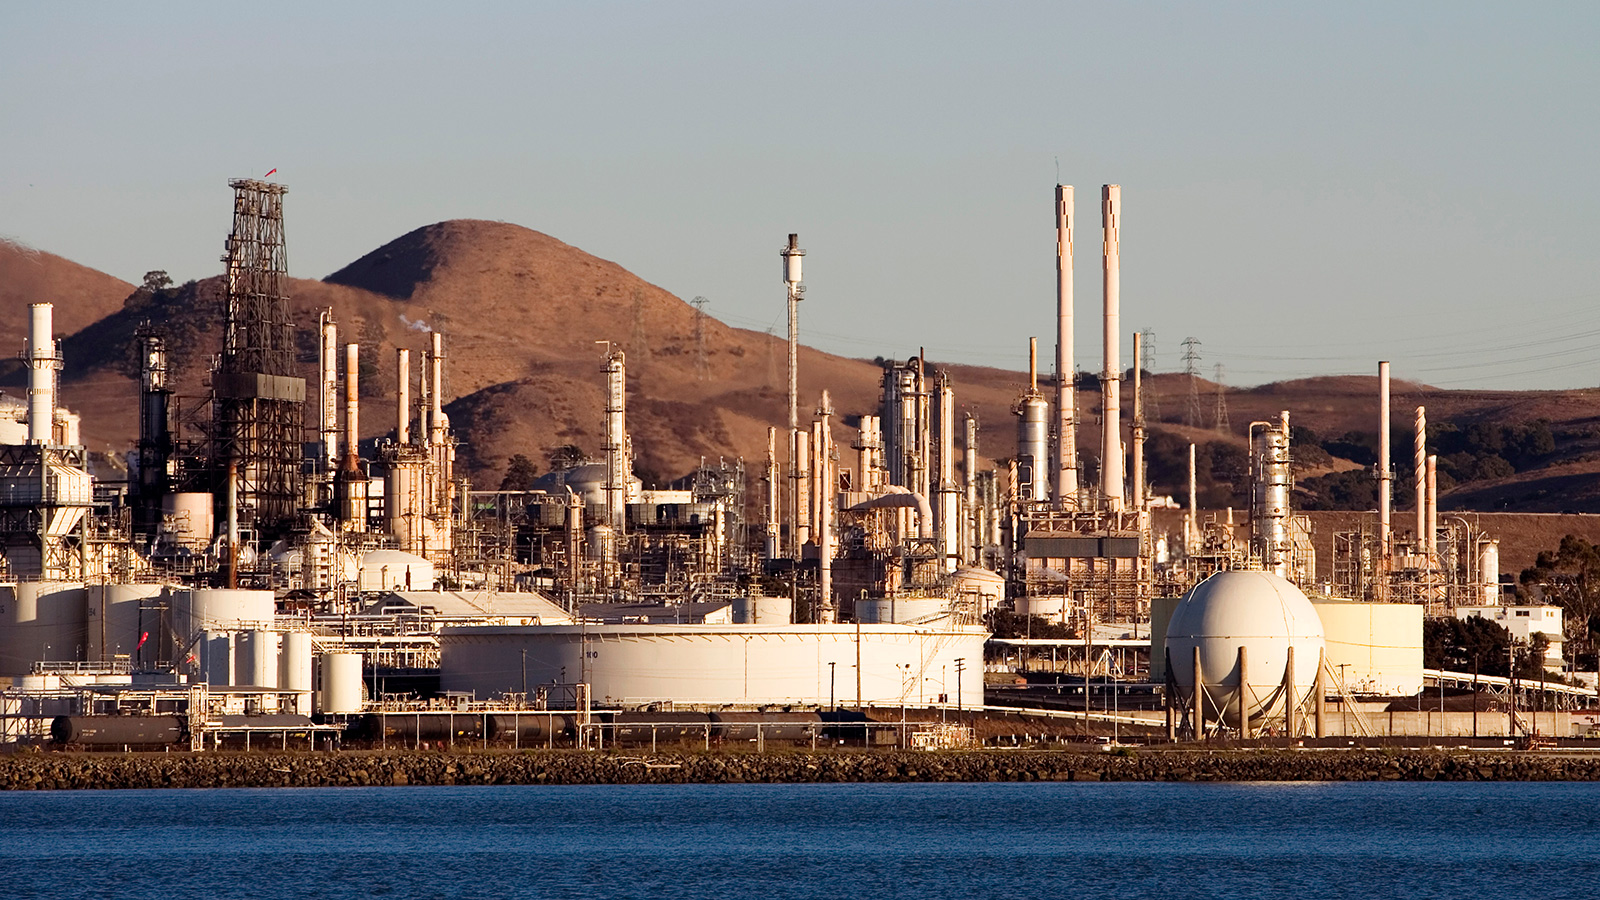 Fossil fuels are the problem, say fossil fuel companies being sued | Grist